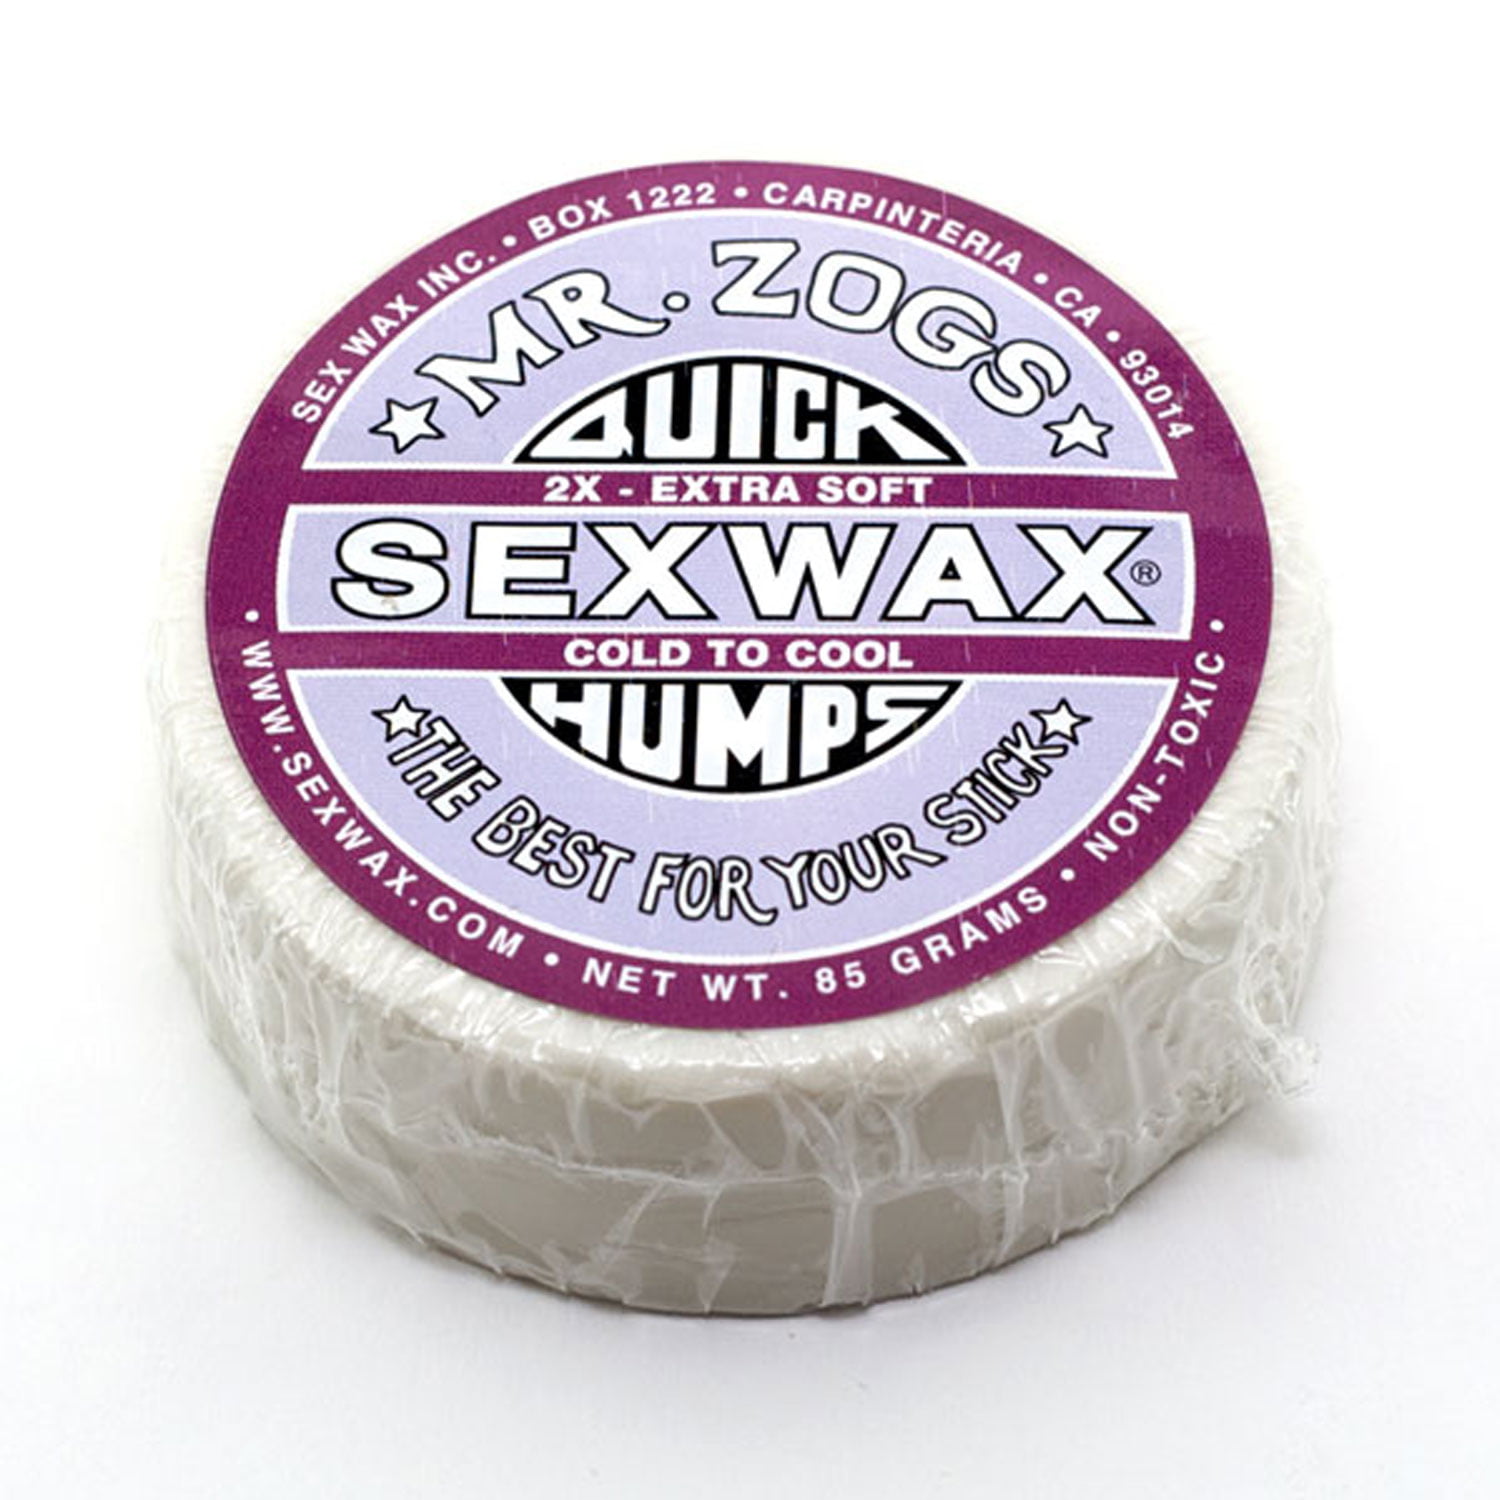 Sexwax Quick Humps surfboard wax formulas are the "go to" choice ...